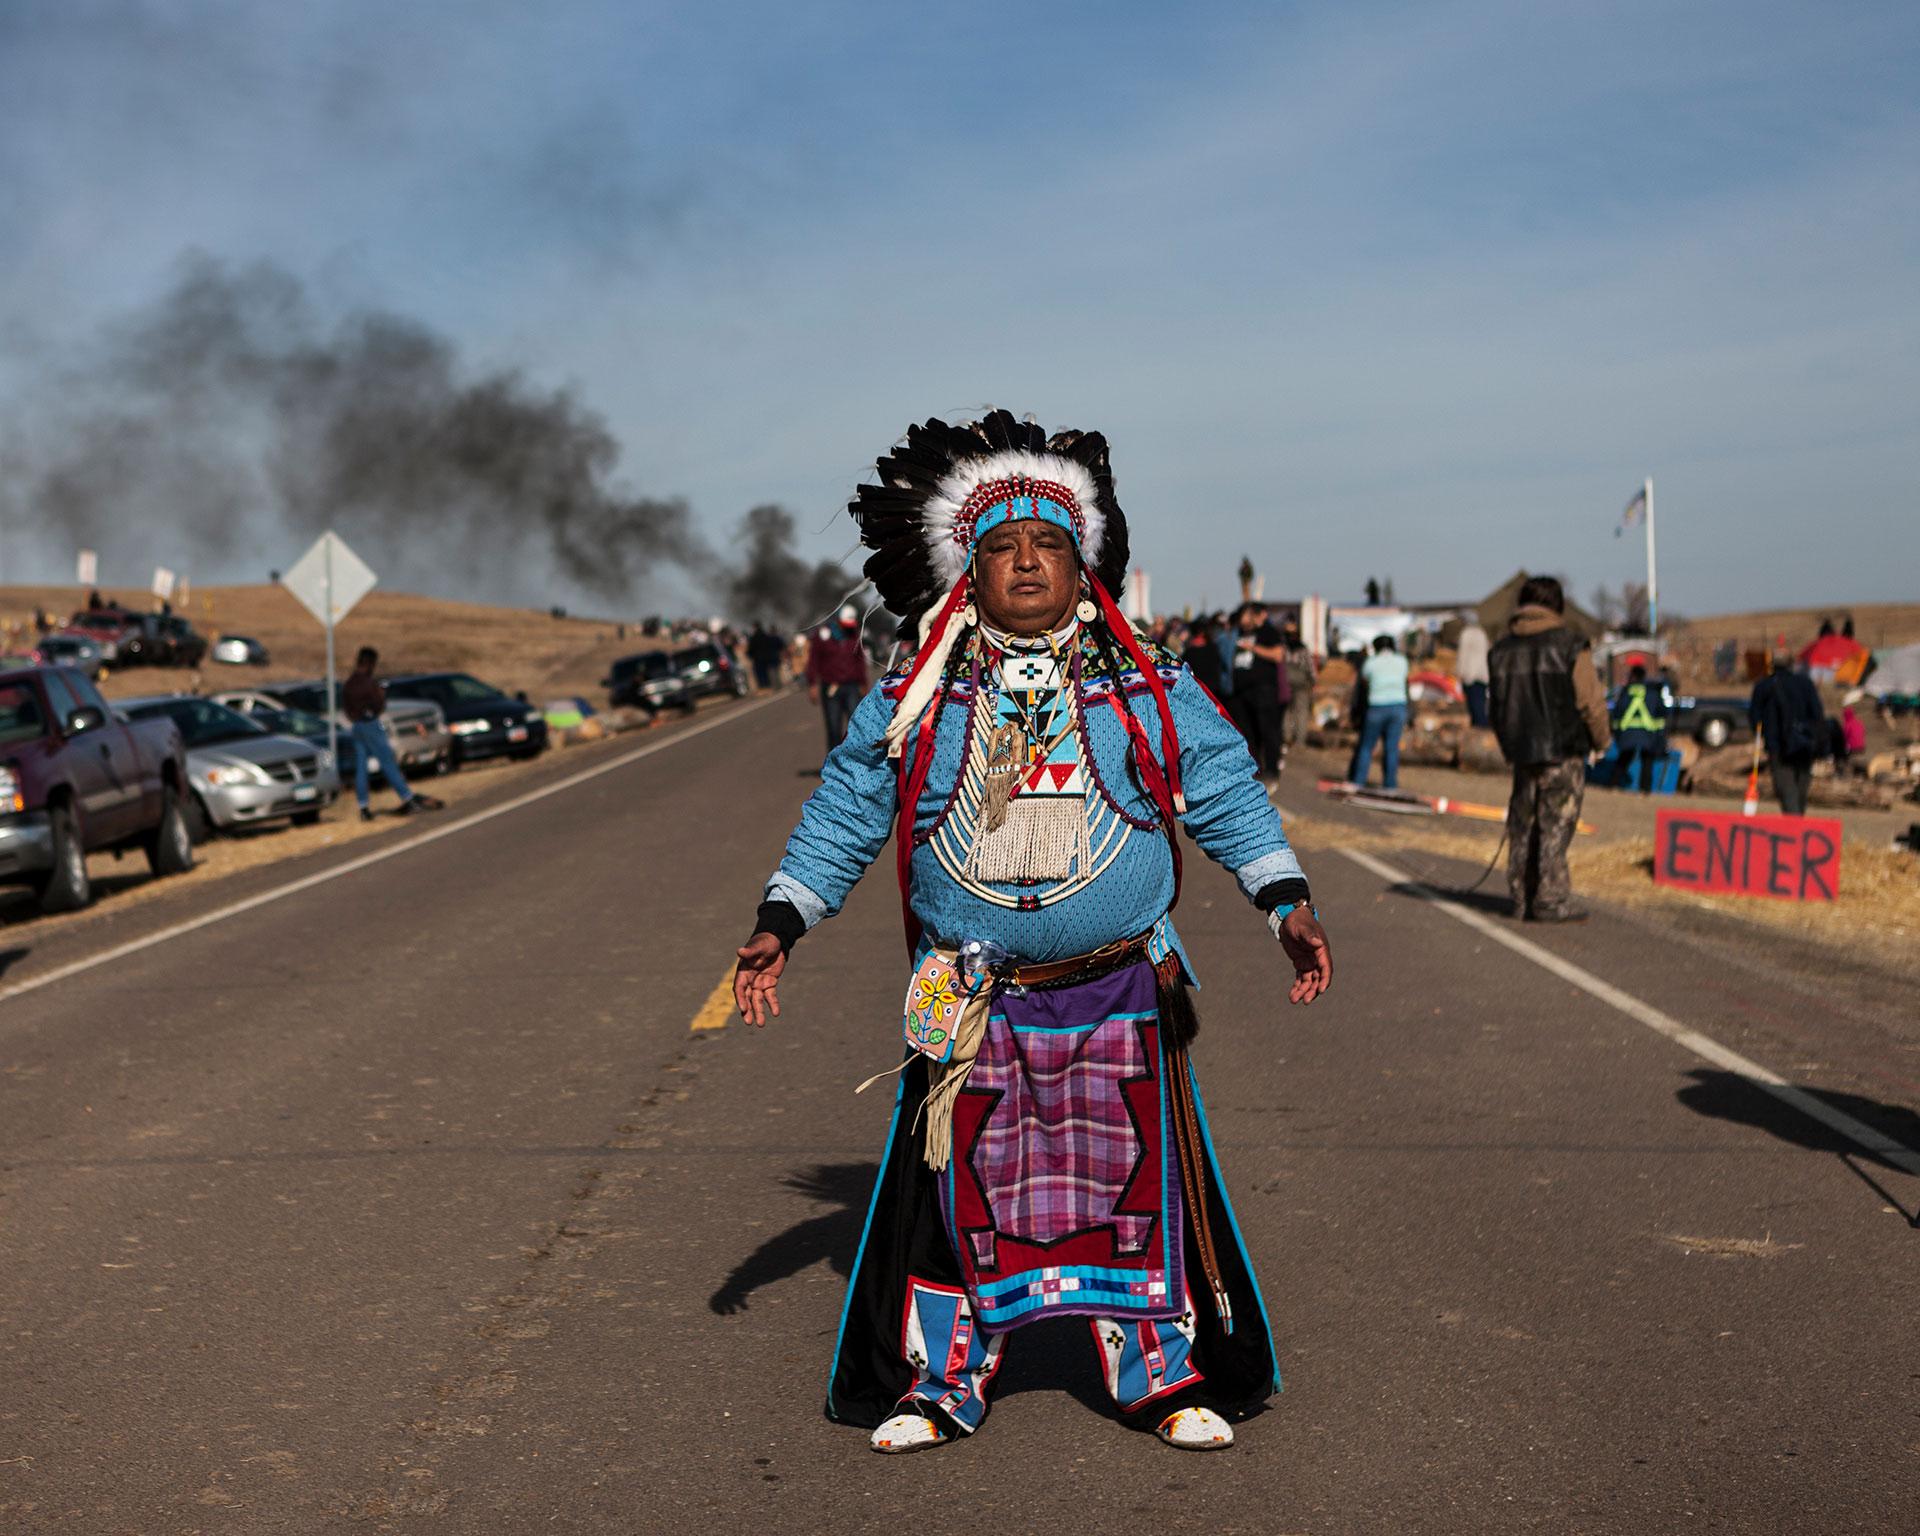 Native Photographer Camille Seaman's Images of NoDAPL